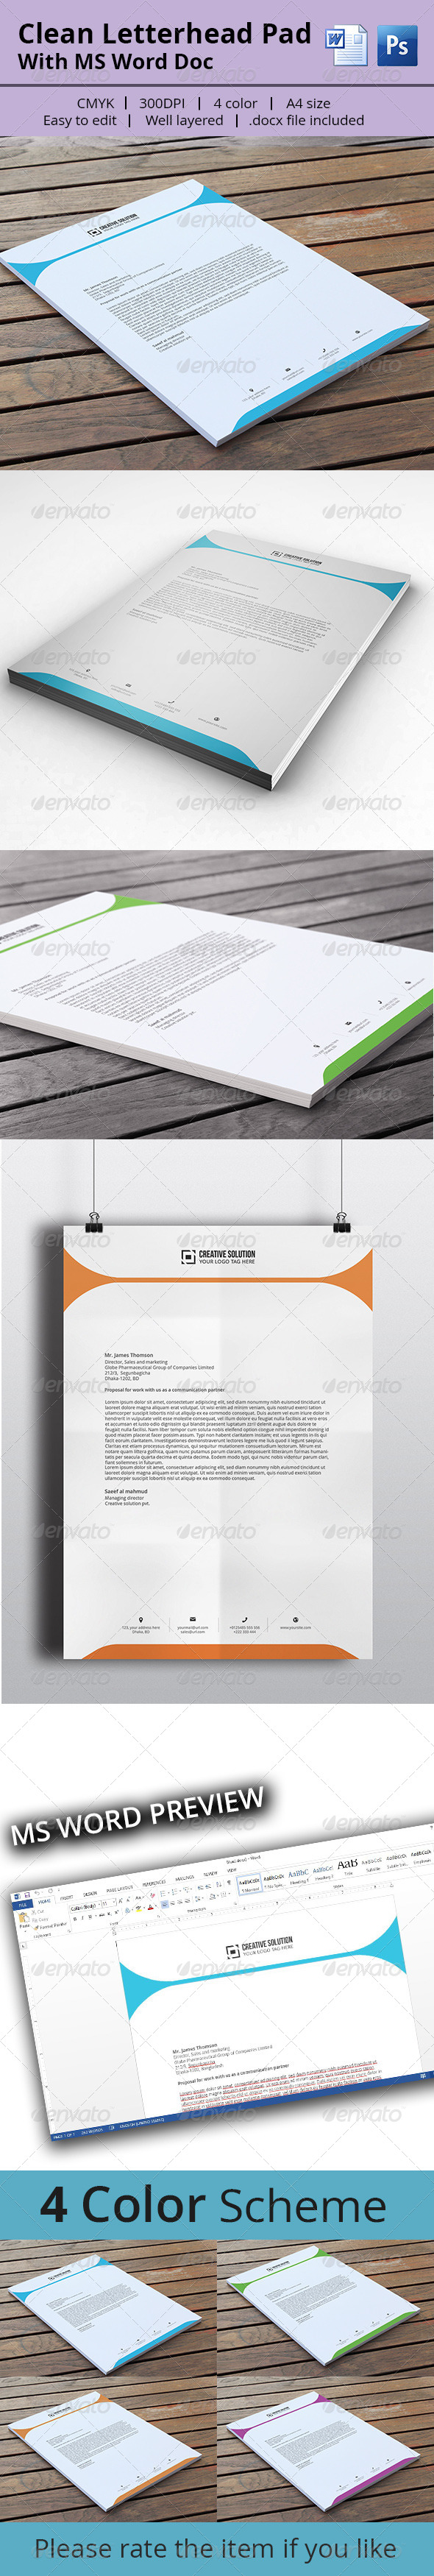 Letterhead Pad With MS Word